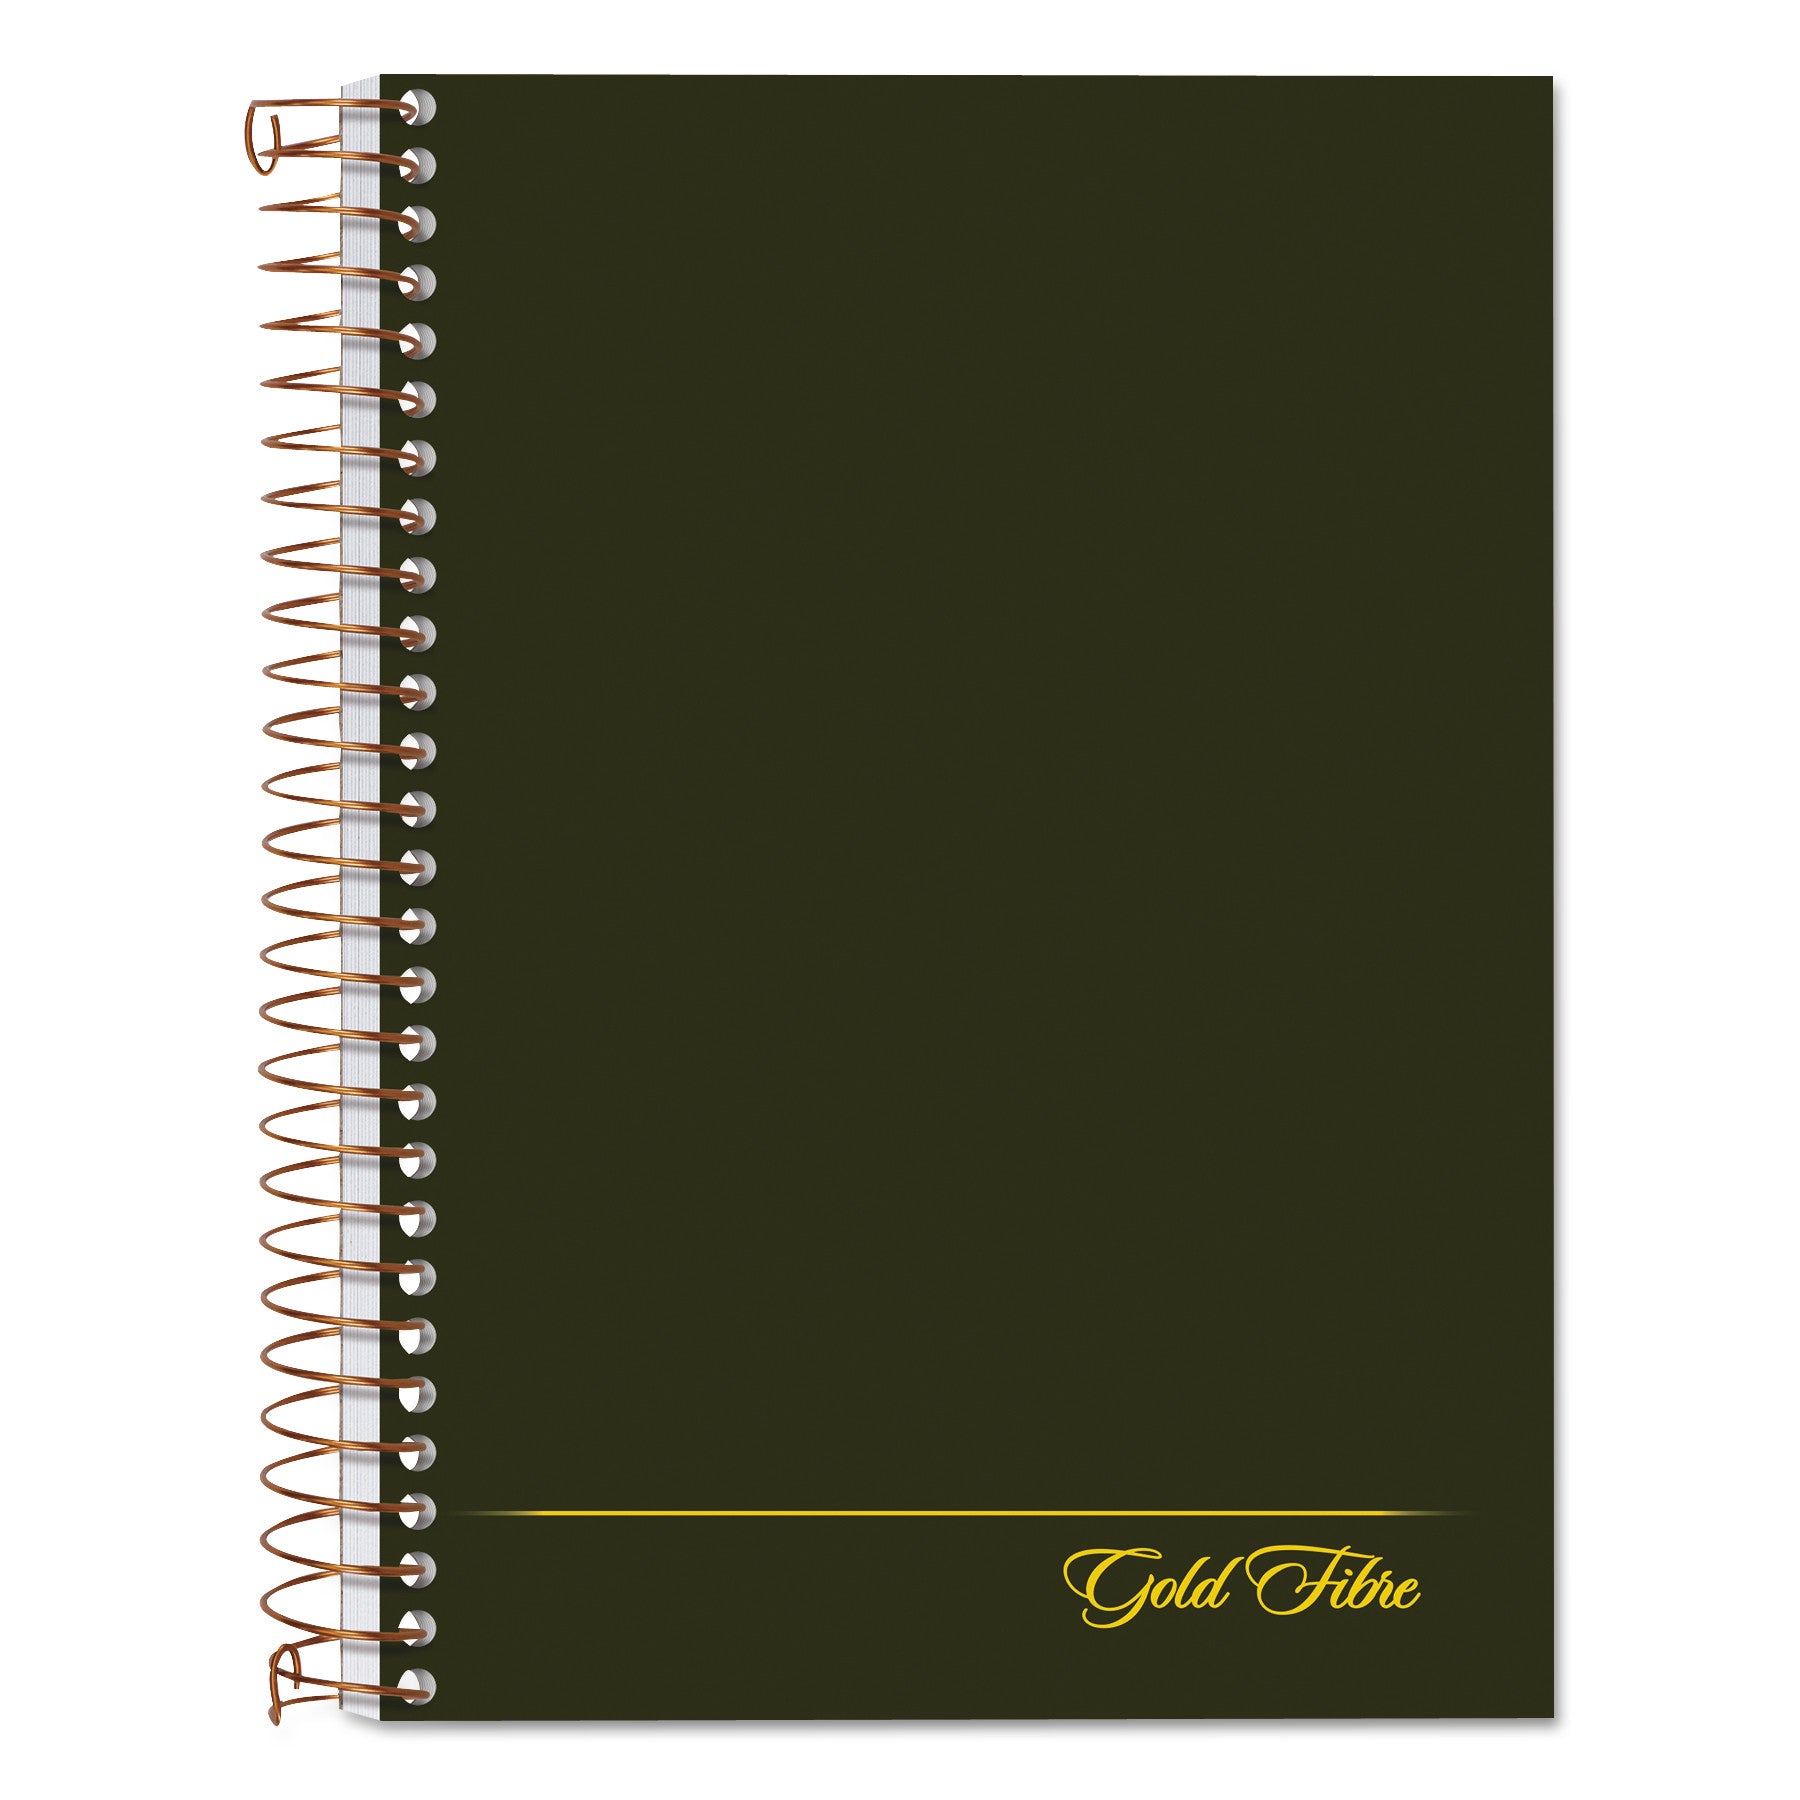 Gold Fibre Personal Notebooks, 1-Subject, Medium/College Rule, Classic Green Cover, (100) 7 x 5 Sheets - 